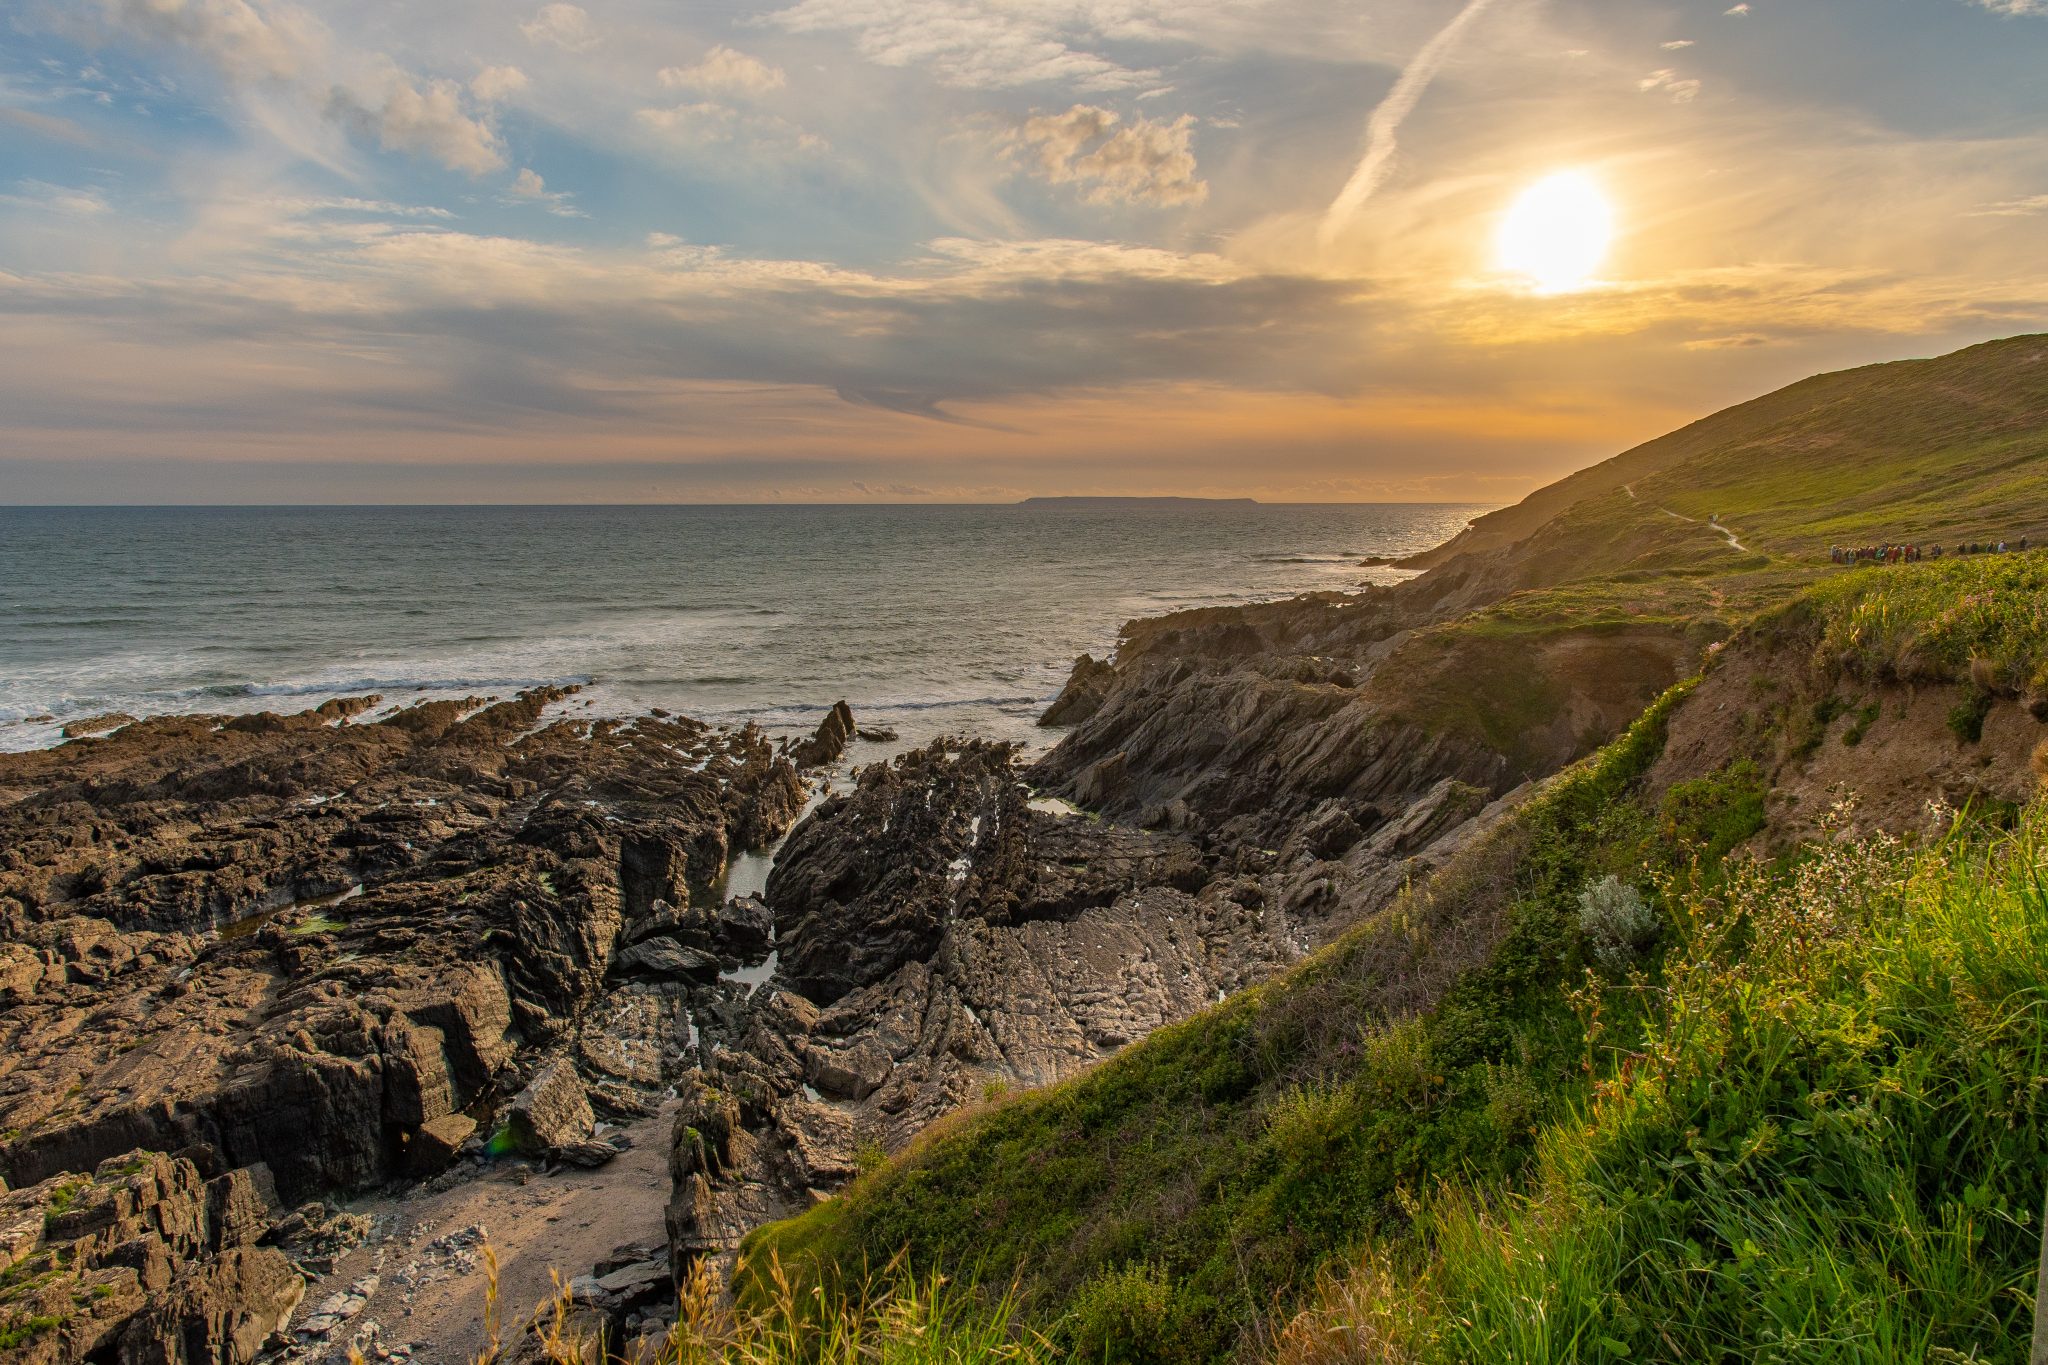 Rocks Rule! Why the Geology Makes North Devon So Special